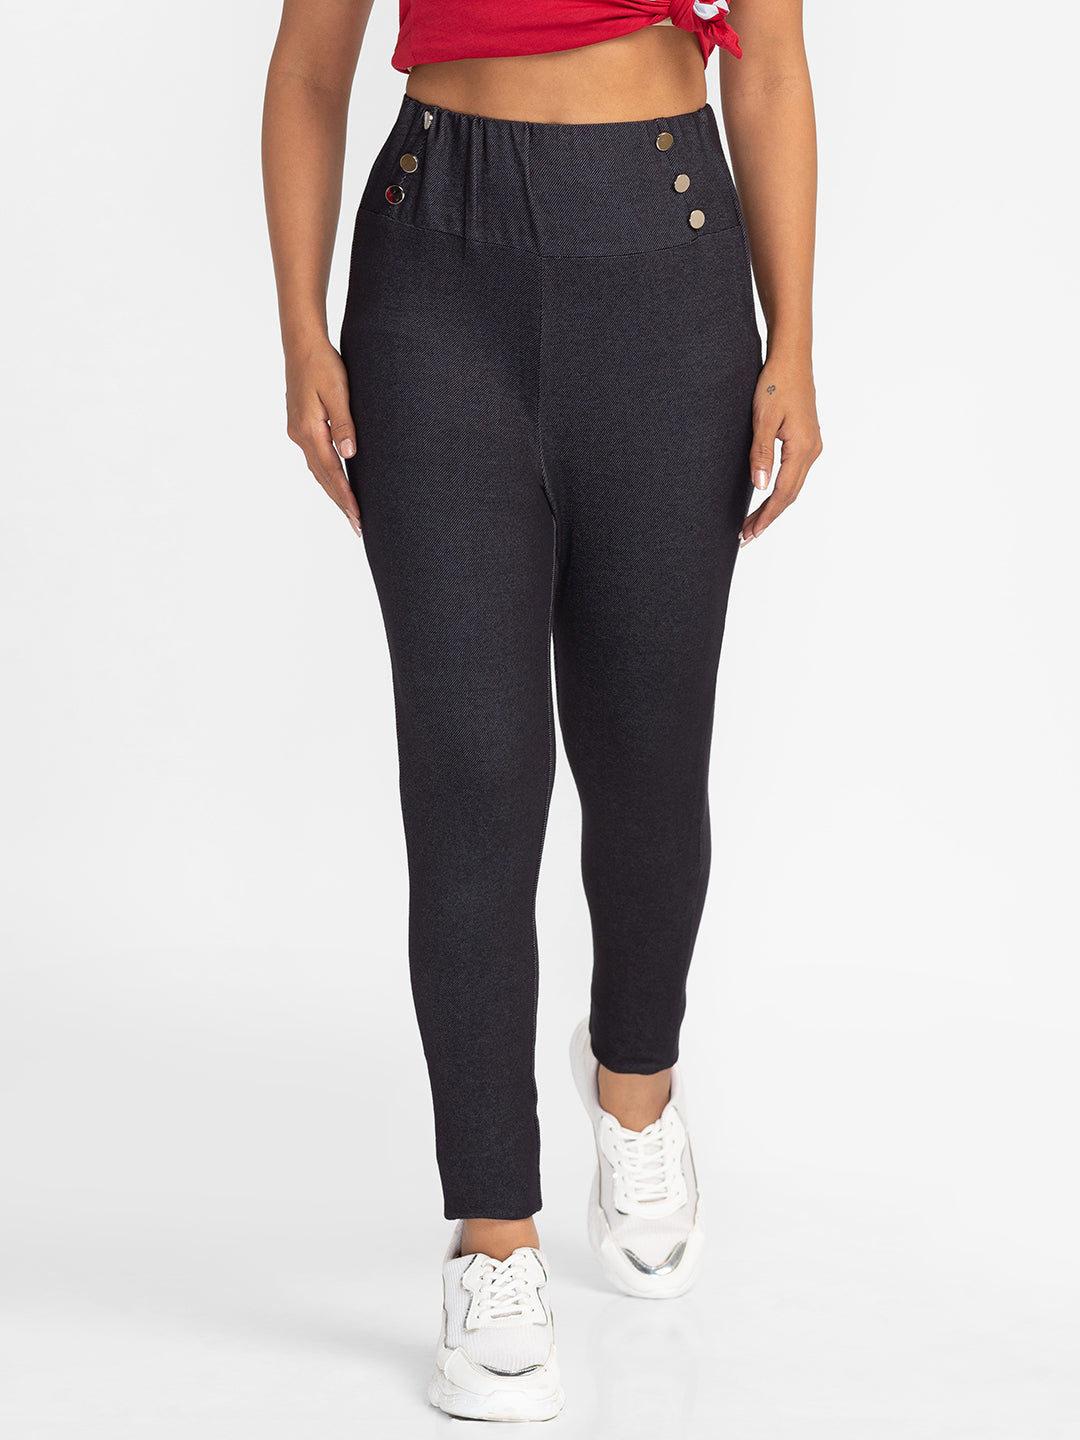 Globus Black Solid Skinny Fit Cropped Peg Trousers